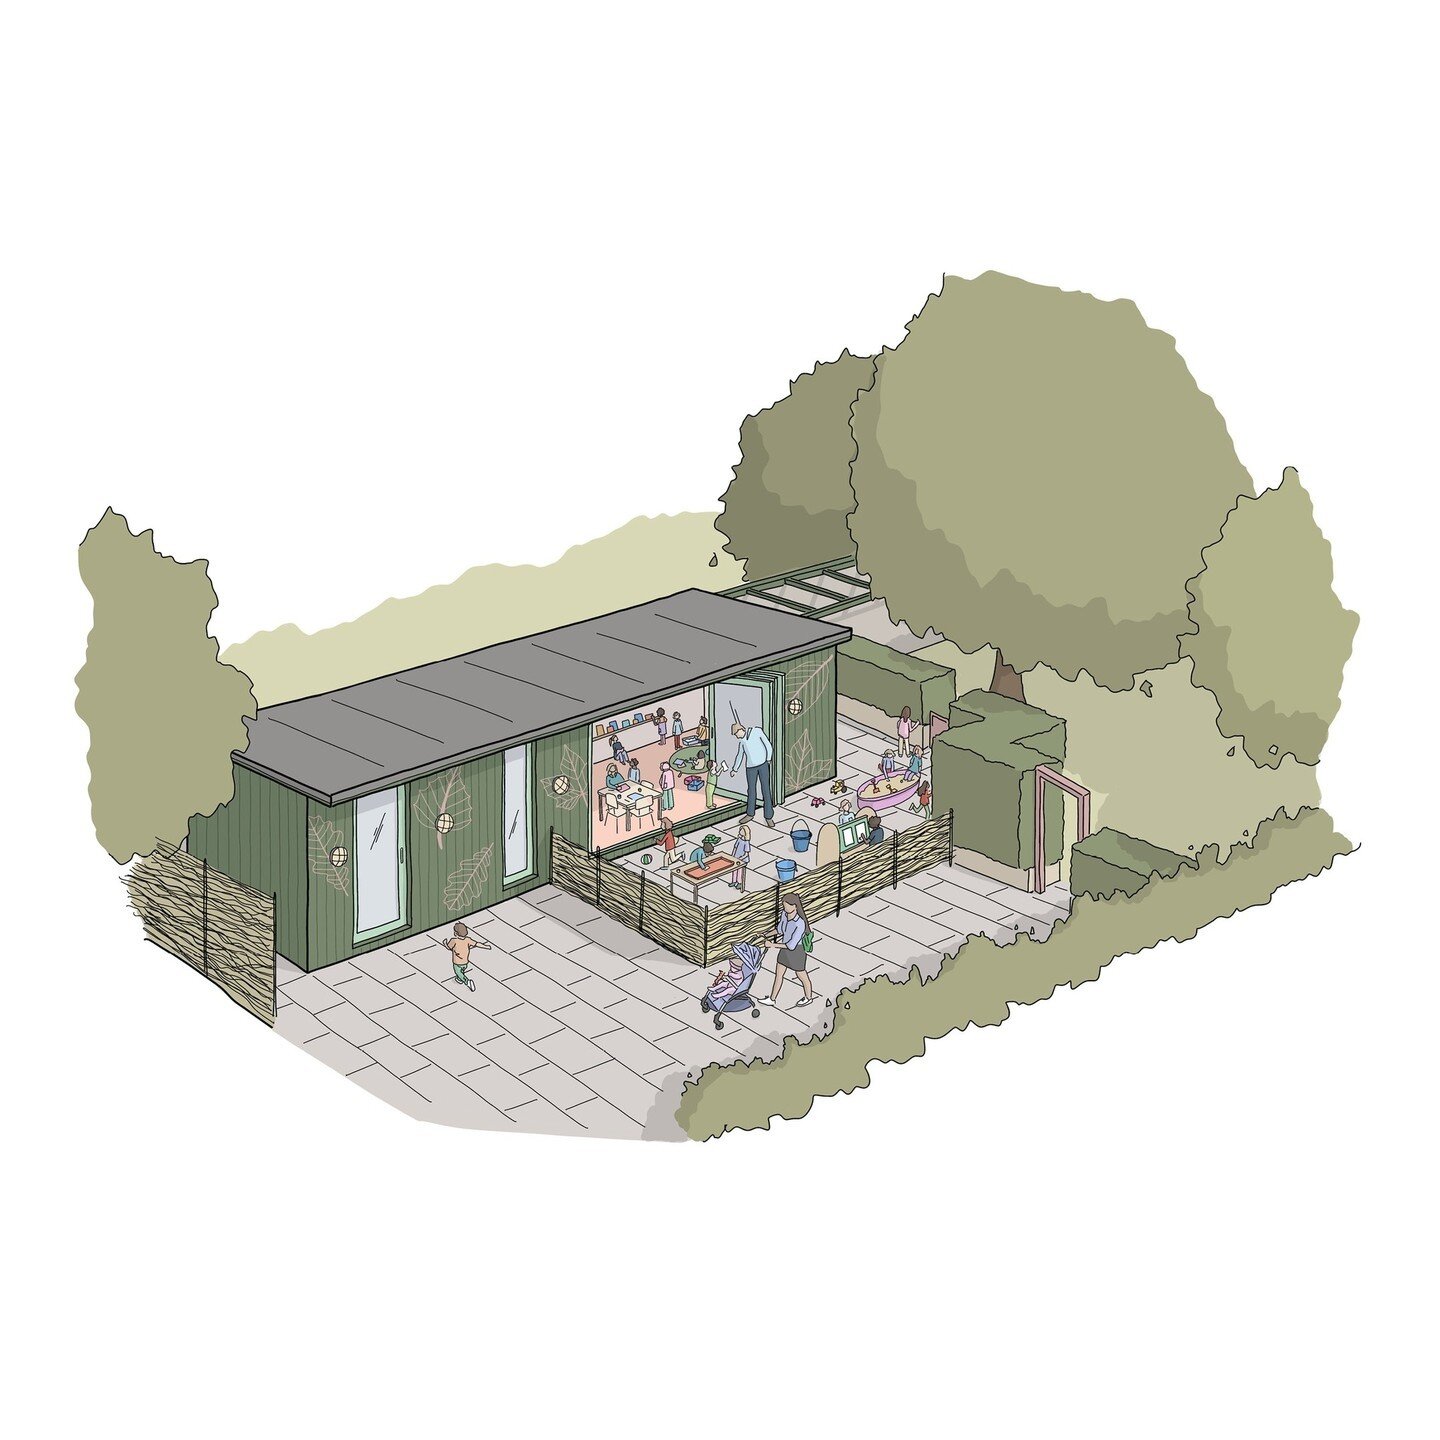 Loved adding the activity to this nursery cabin 🚸🌳🧸⁠
.⁠
.⁠
.⁠
.⁠
.⁠
⁠
#katherinedaunceyillustration#architecturaldrawing #architecturalvisualisation #architecturalvizualization #architecturalillustration #architecturalsketch  #architecturesketch #